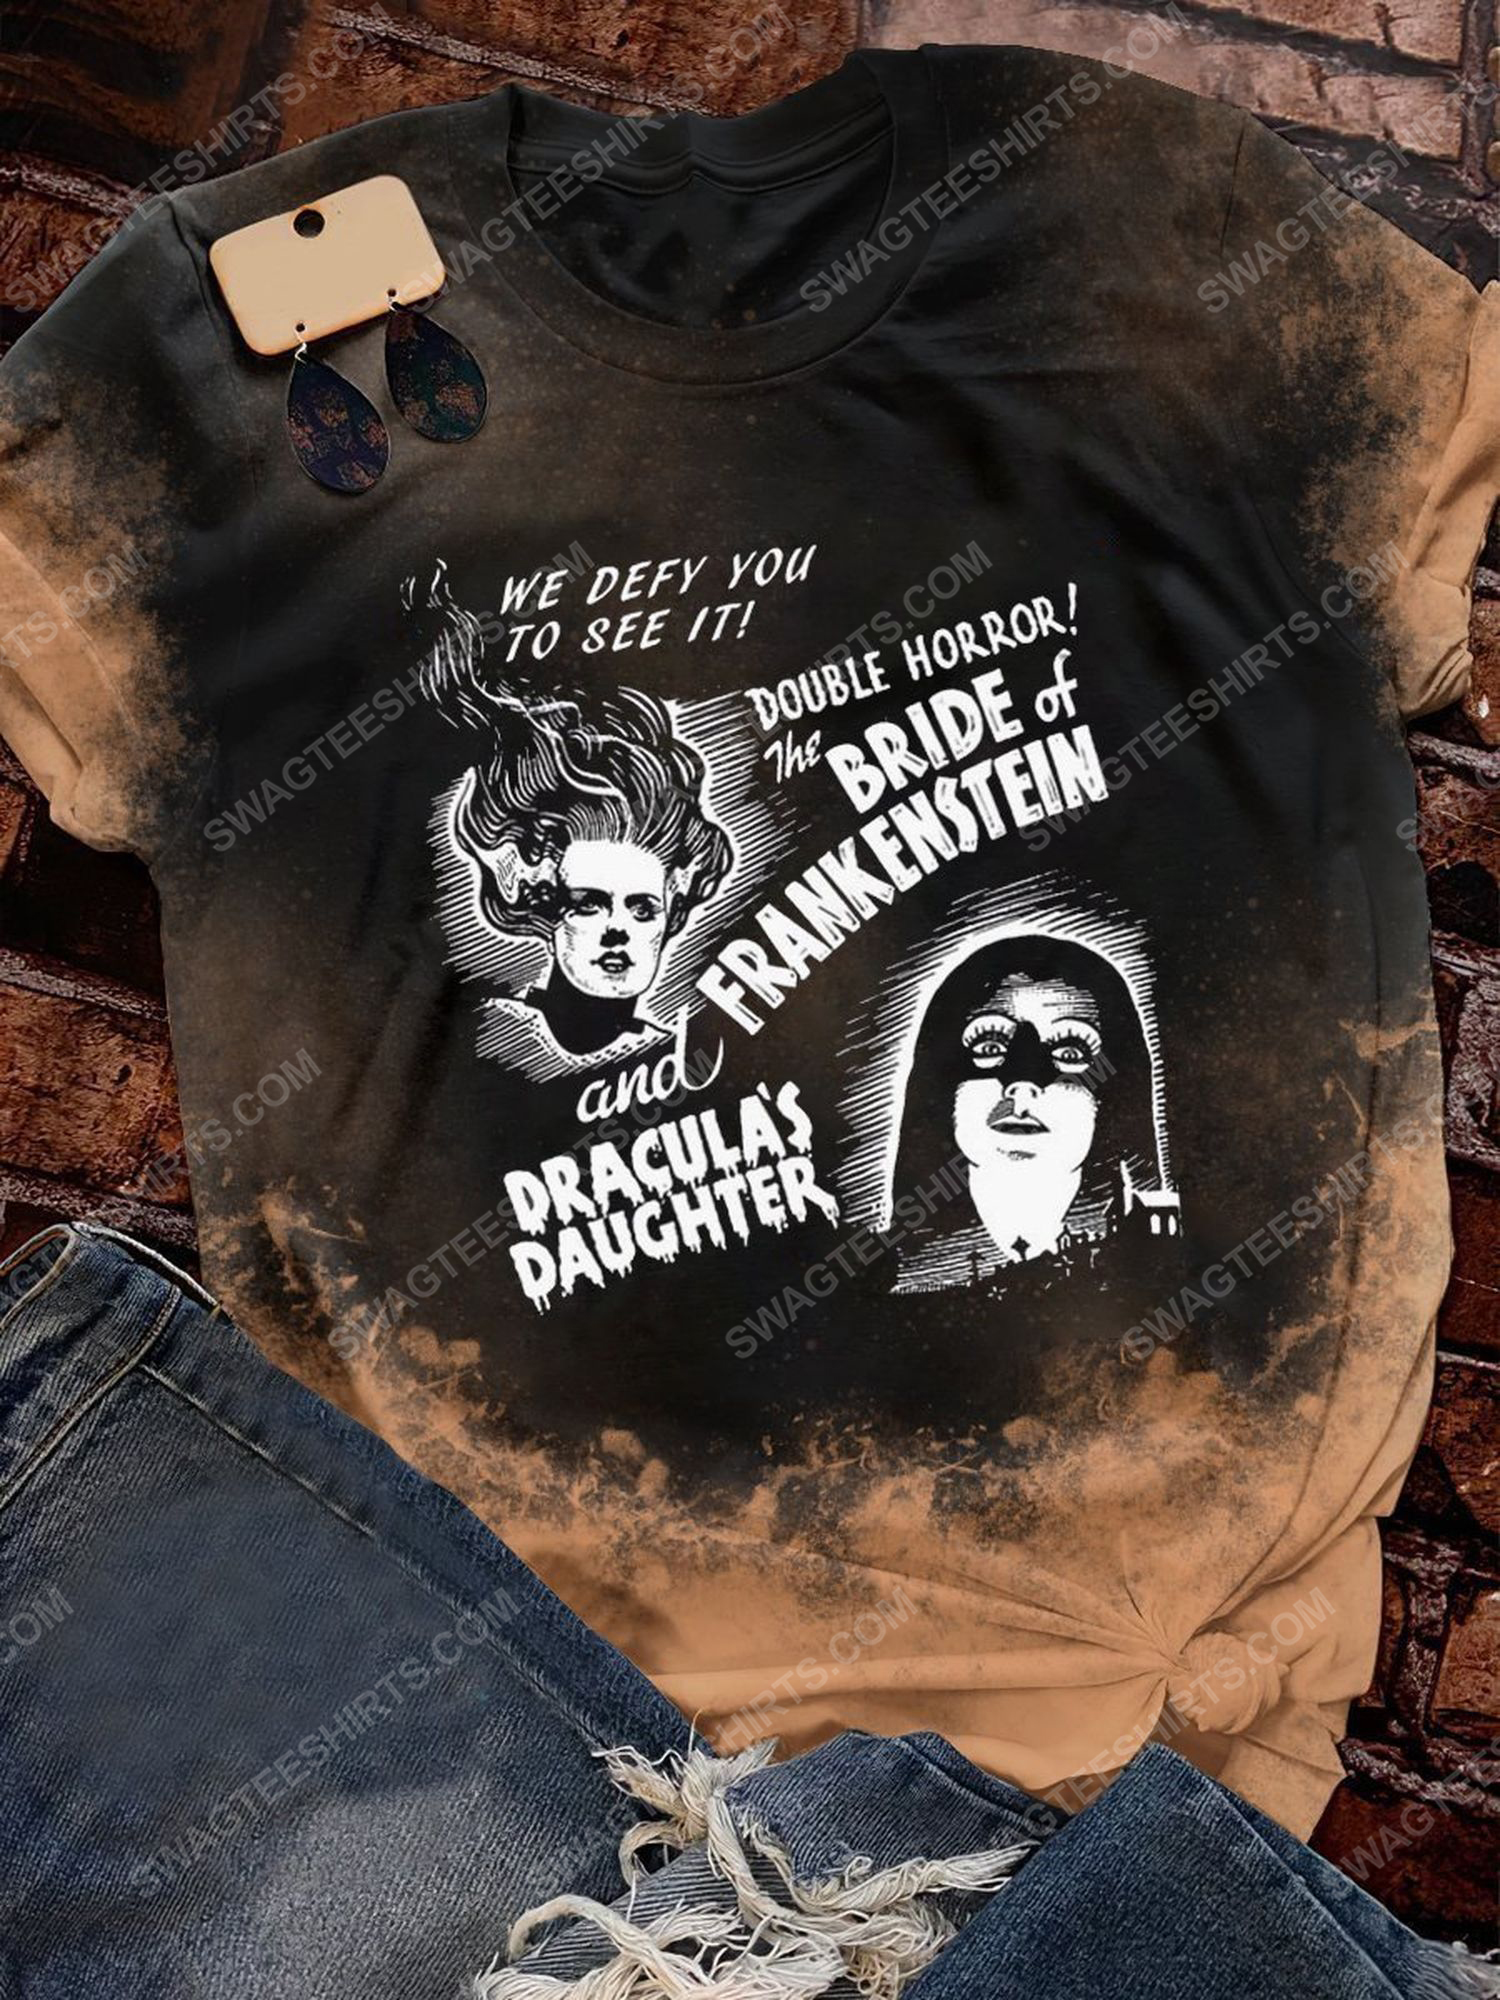 [special edition] Halloween bride of frankenstein and dracula daughter shirt – maria (halloween)